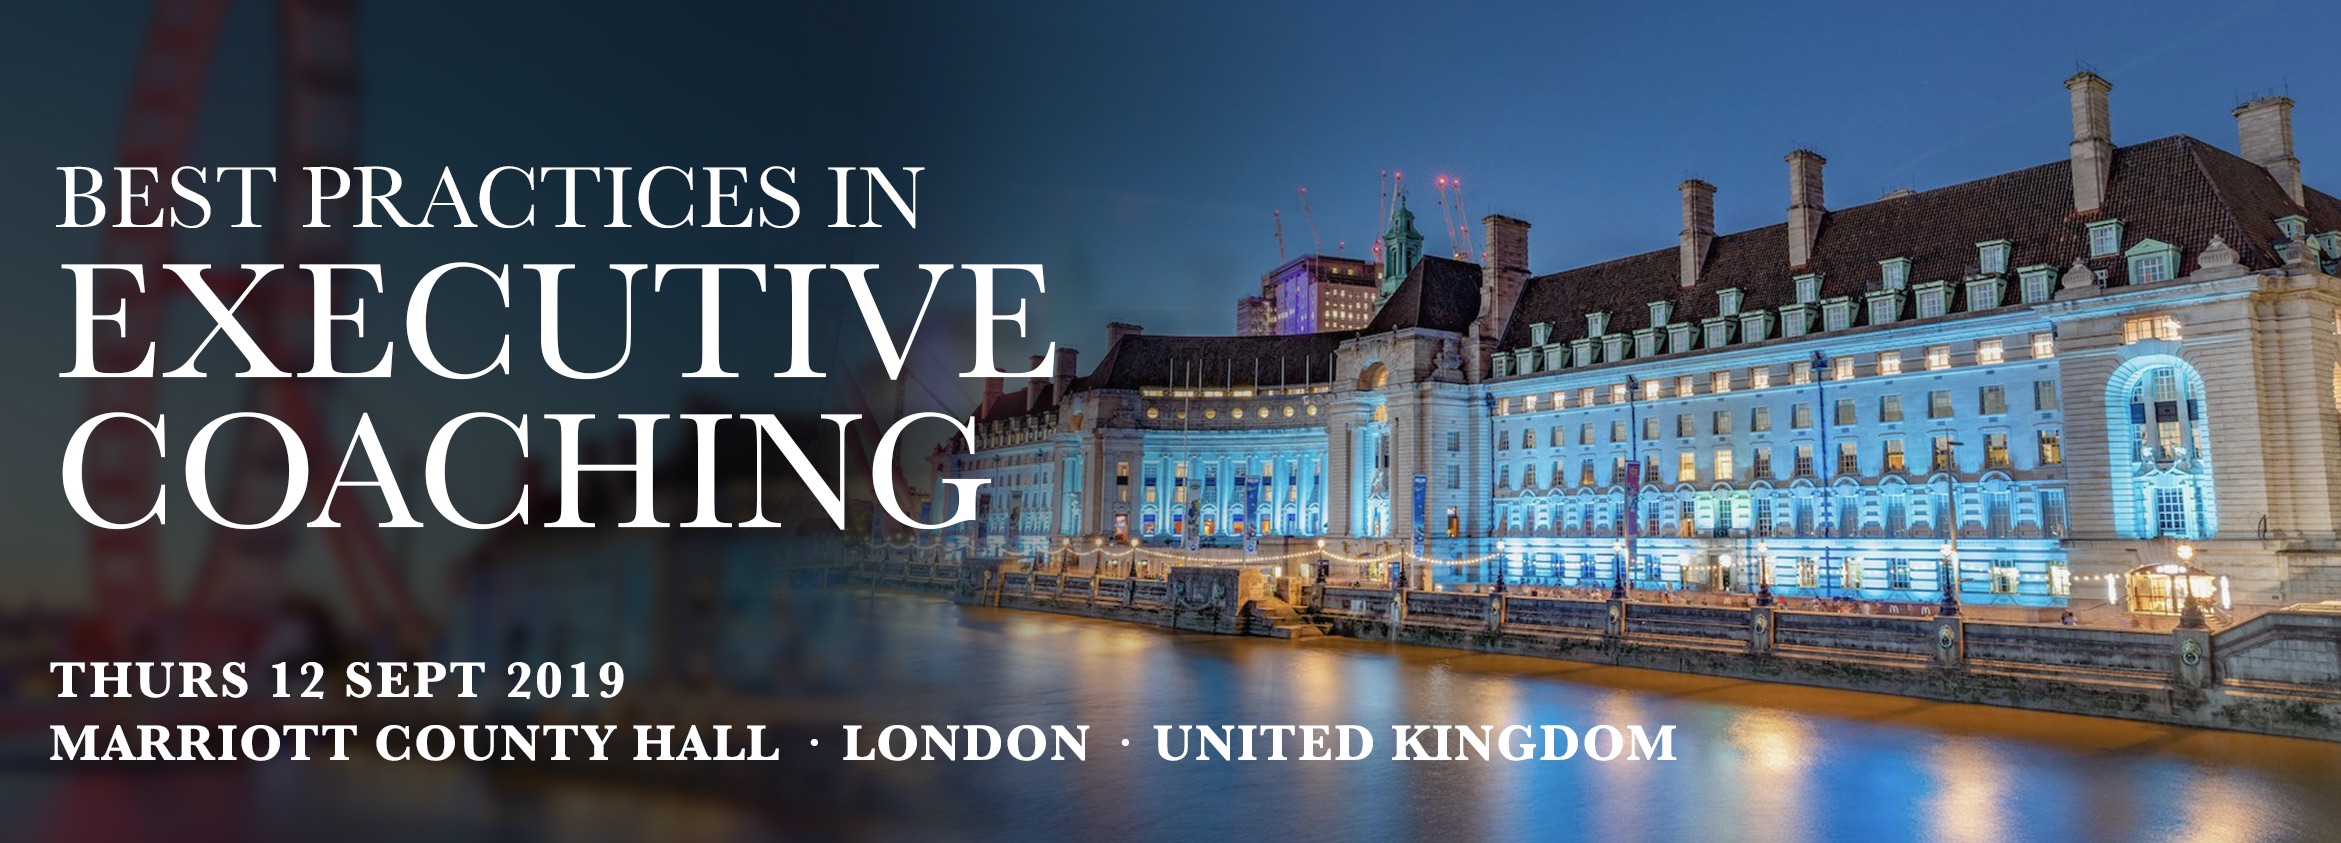 BEST PRACTICES IN EXECUTIVE COACHING THURS 12 SEPT 2019 MARRIOTT COUNTY HALL • LONDON • UNITED KINGDOM